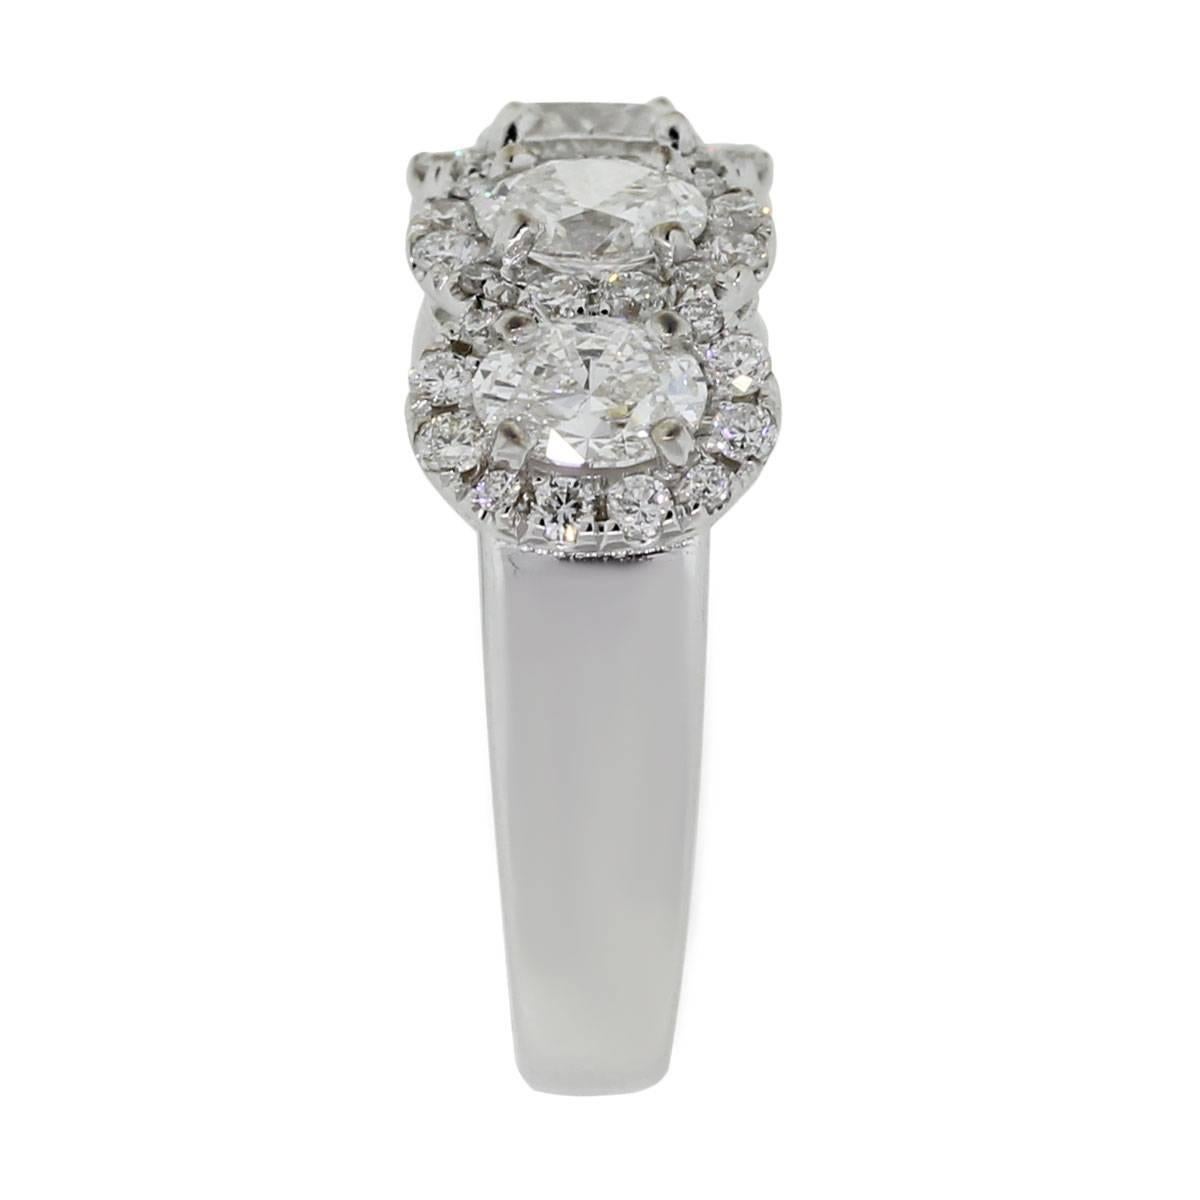 Material: 18k white gold
Diamond Details: Approximately 1.43ctw of oval shape diamonds and 0.48ctw of round brilliant diamonds. Diamonds are G/H in color and VS in clarity
Ring Size: 6
Ring Measurements: 0.87″ x 0.31″ x 0.85″
Total Weight: 5.6g